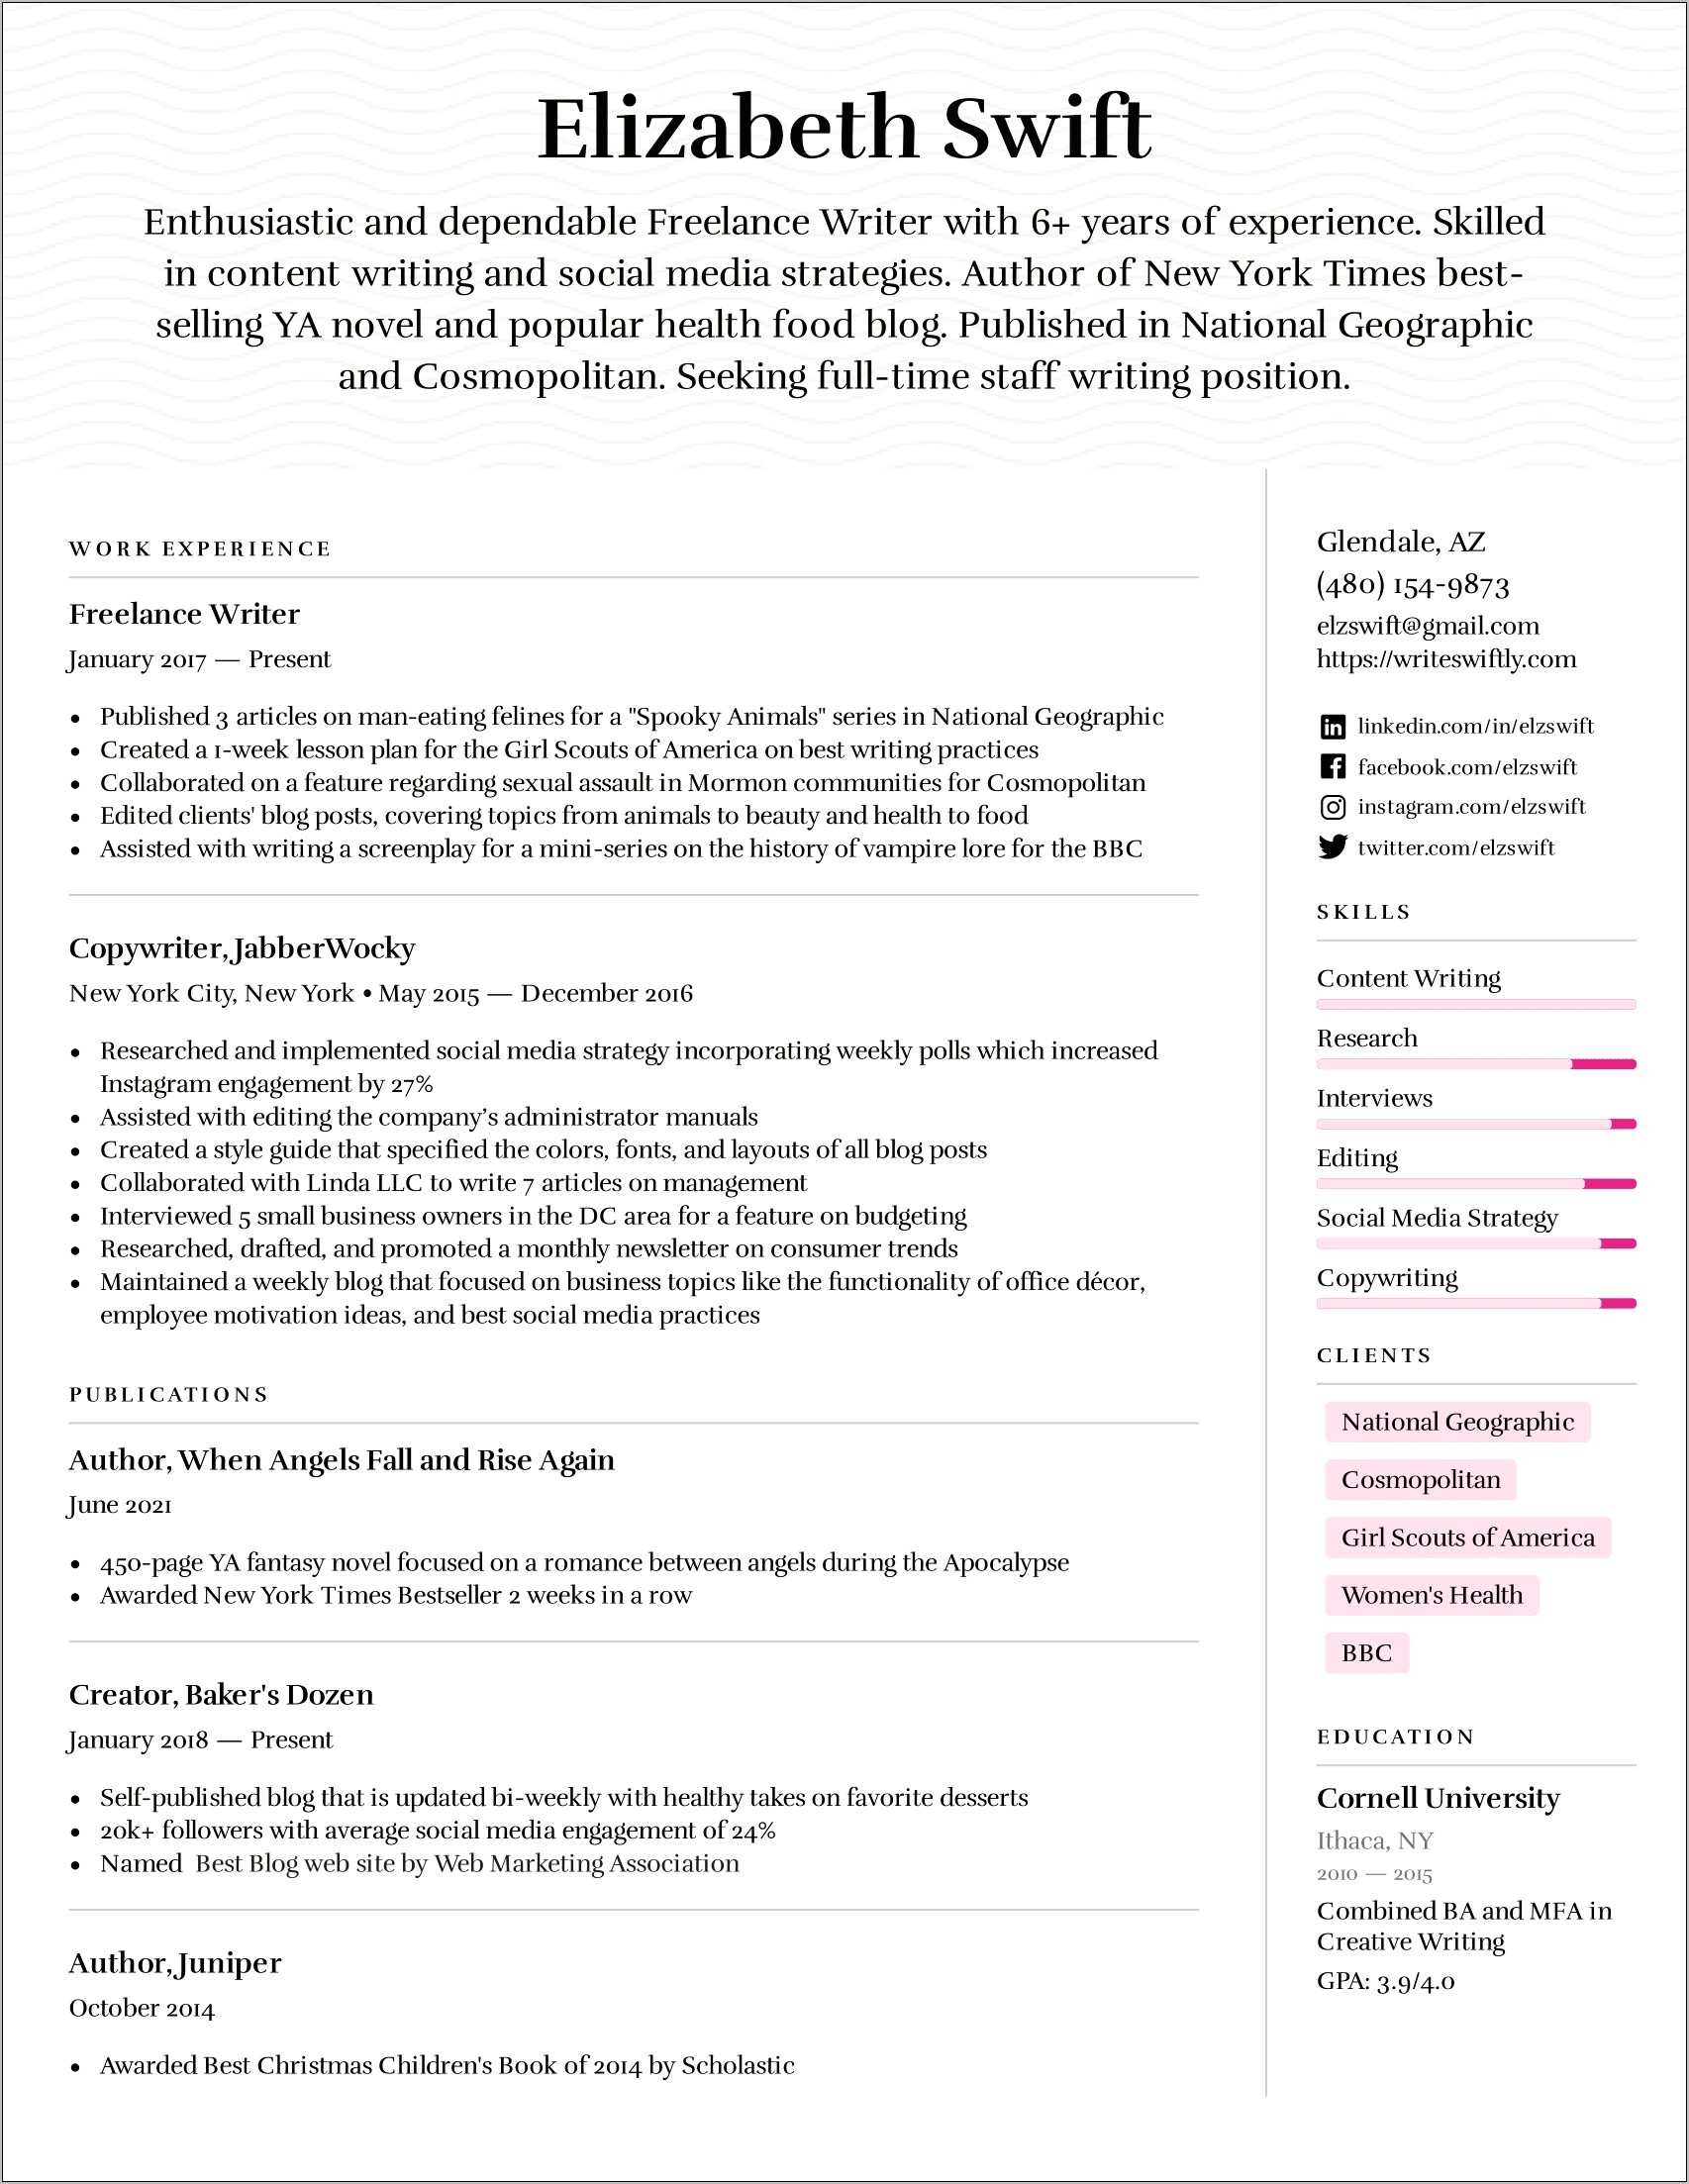 Resume For Freelance Writer Without Experience